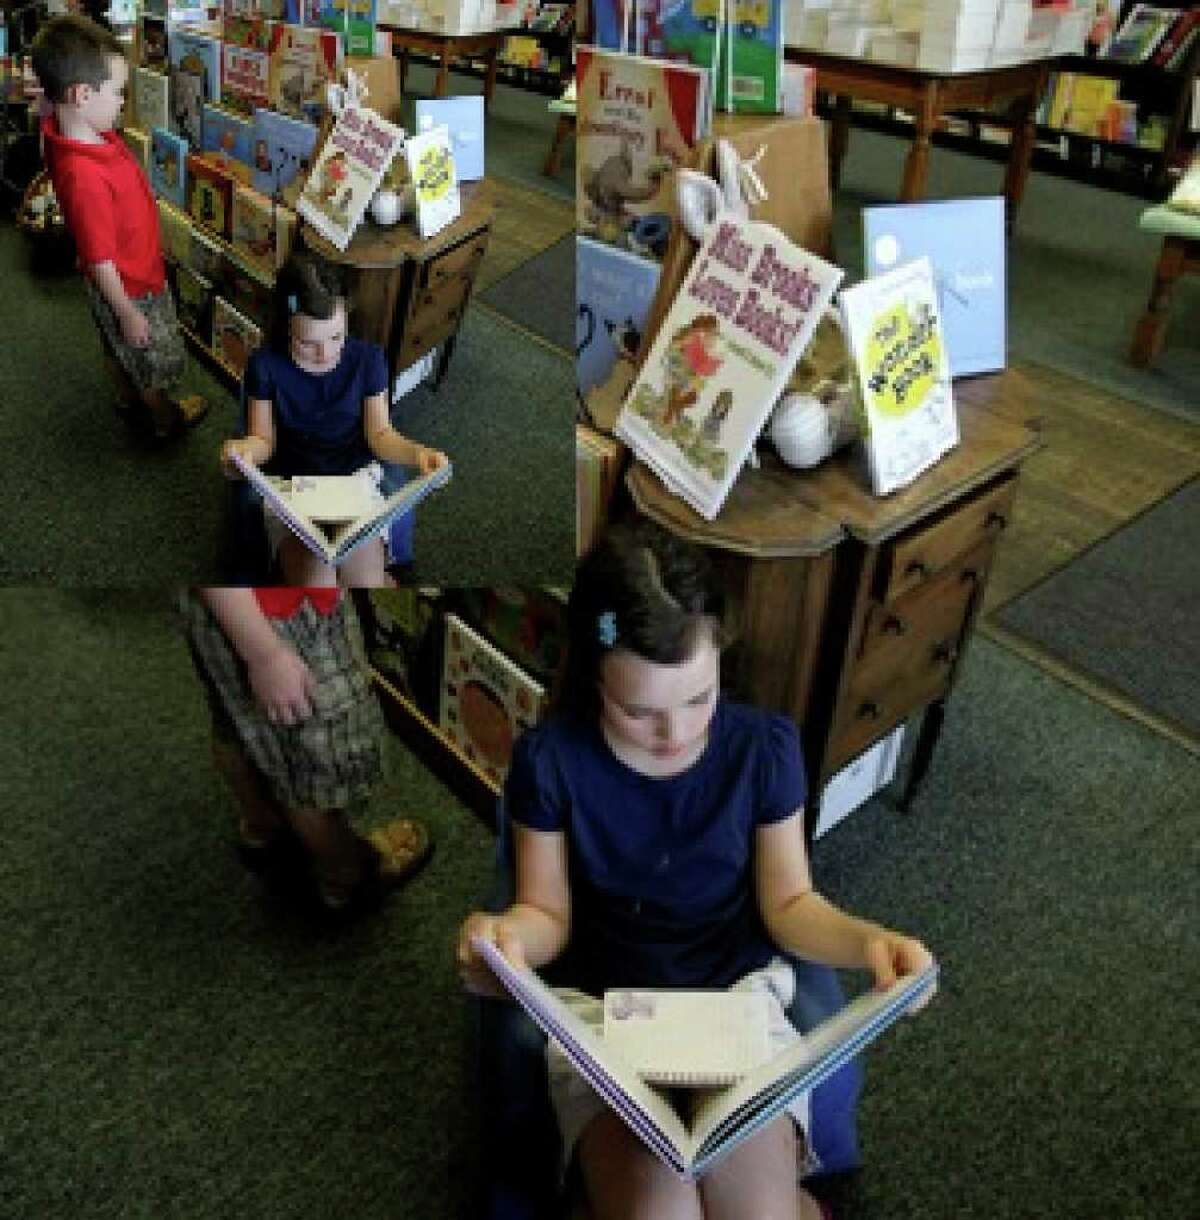 Kiley Hatch, 9, reads as her brother, John Austin Hatch, 7, browses at the Blue Willow Bookshop in Houston.